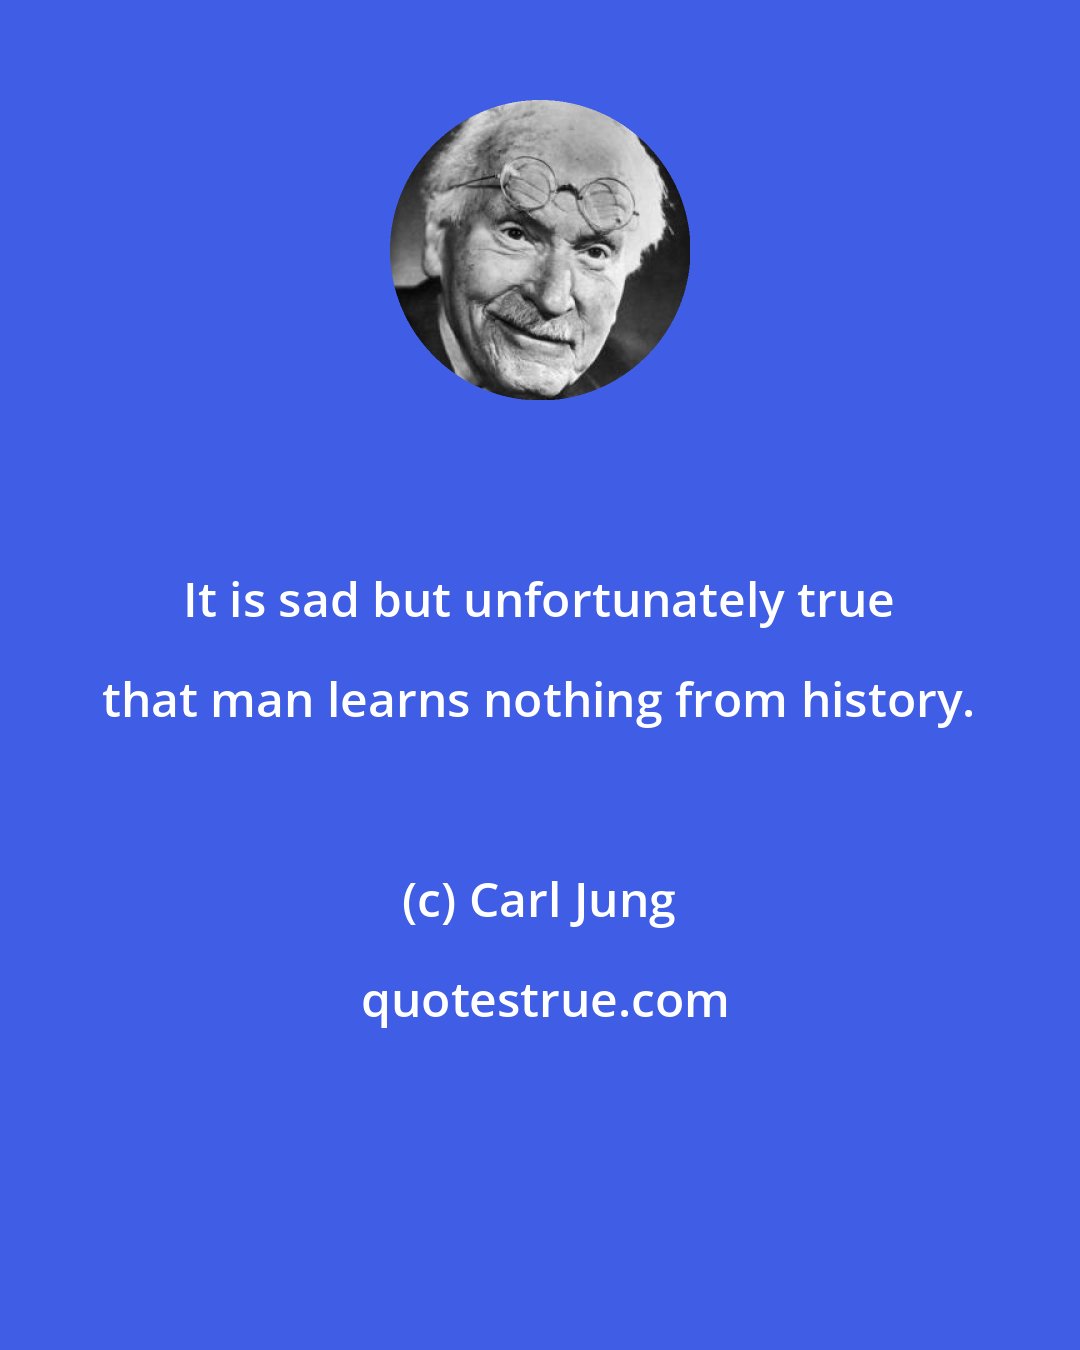 Carl Jung: It is sad but unfortunately true that man learns nothing from history.